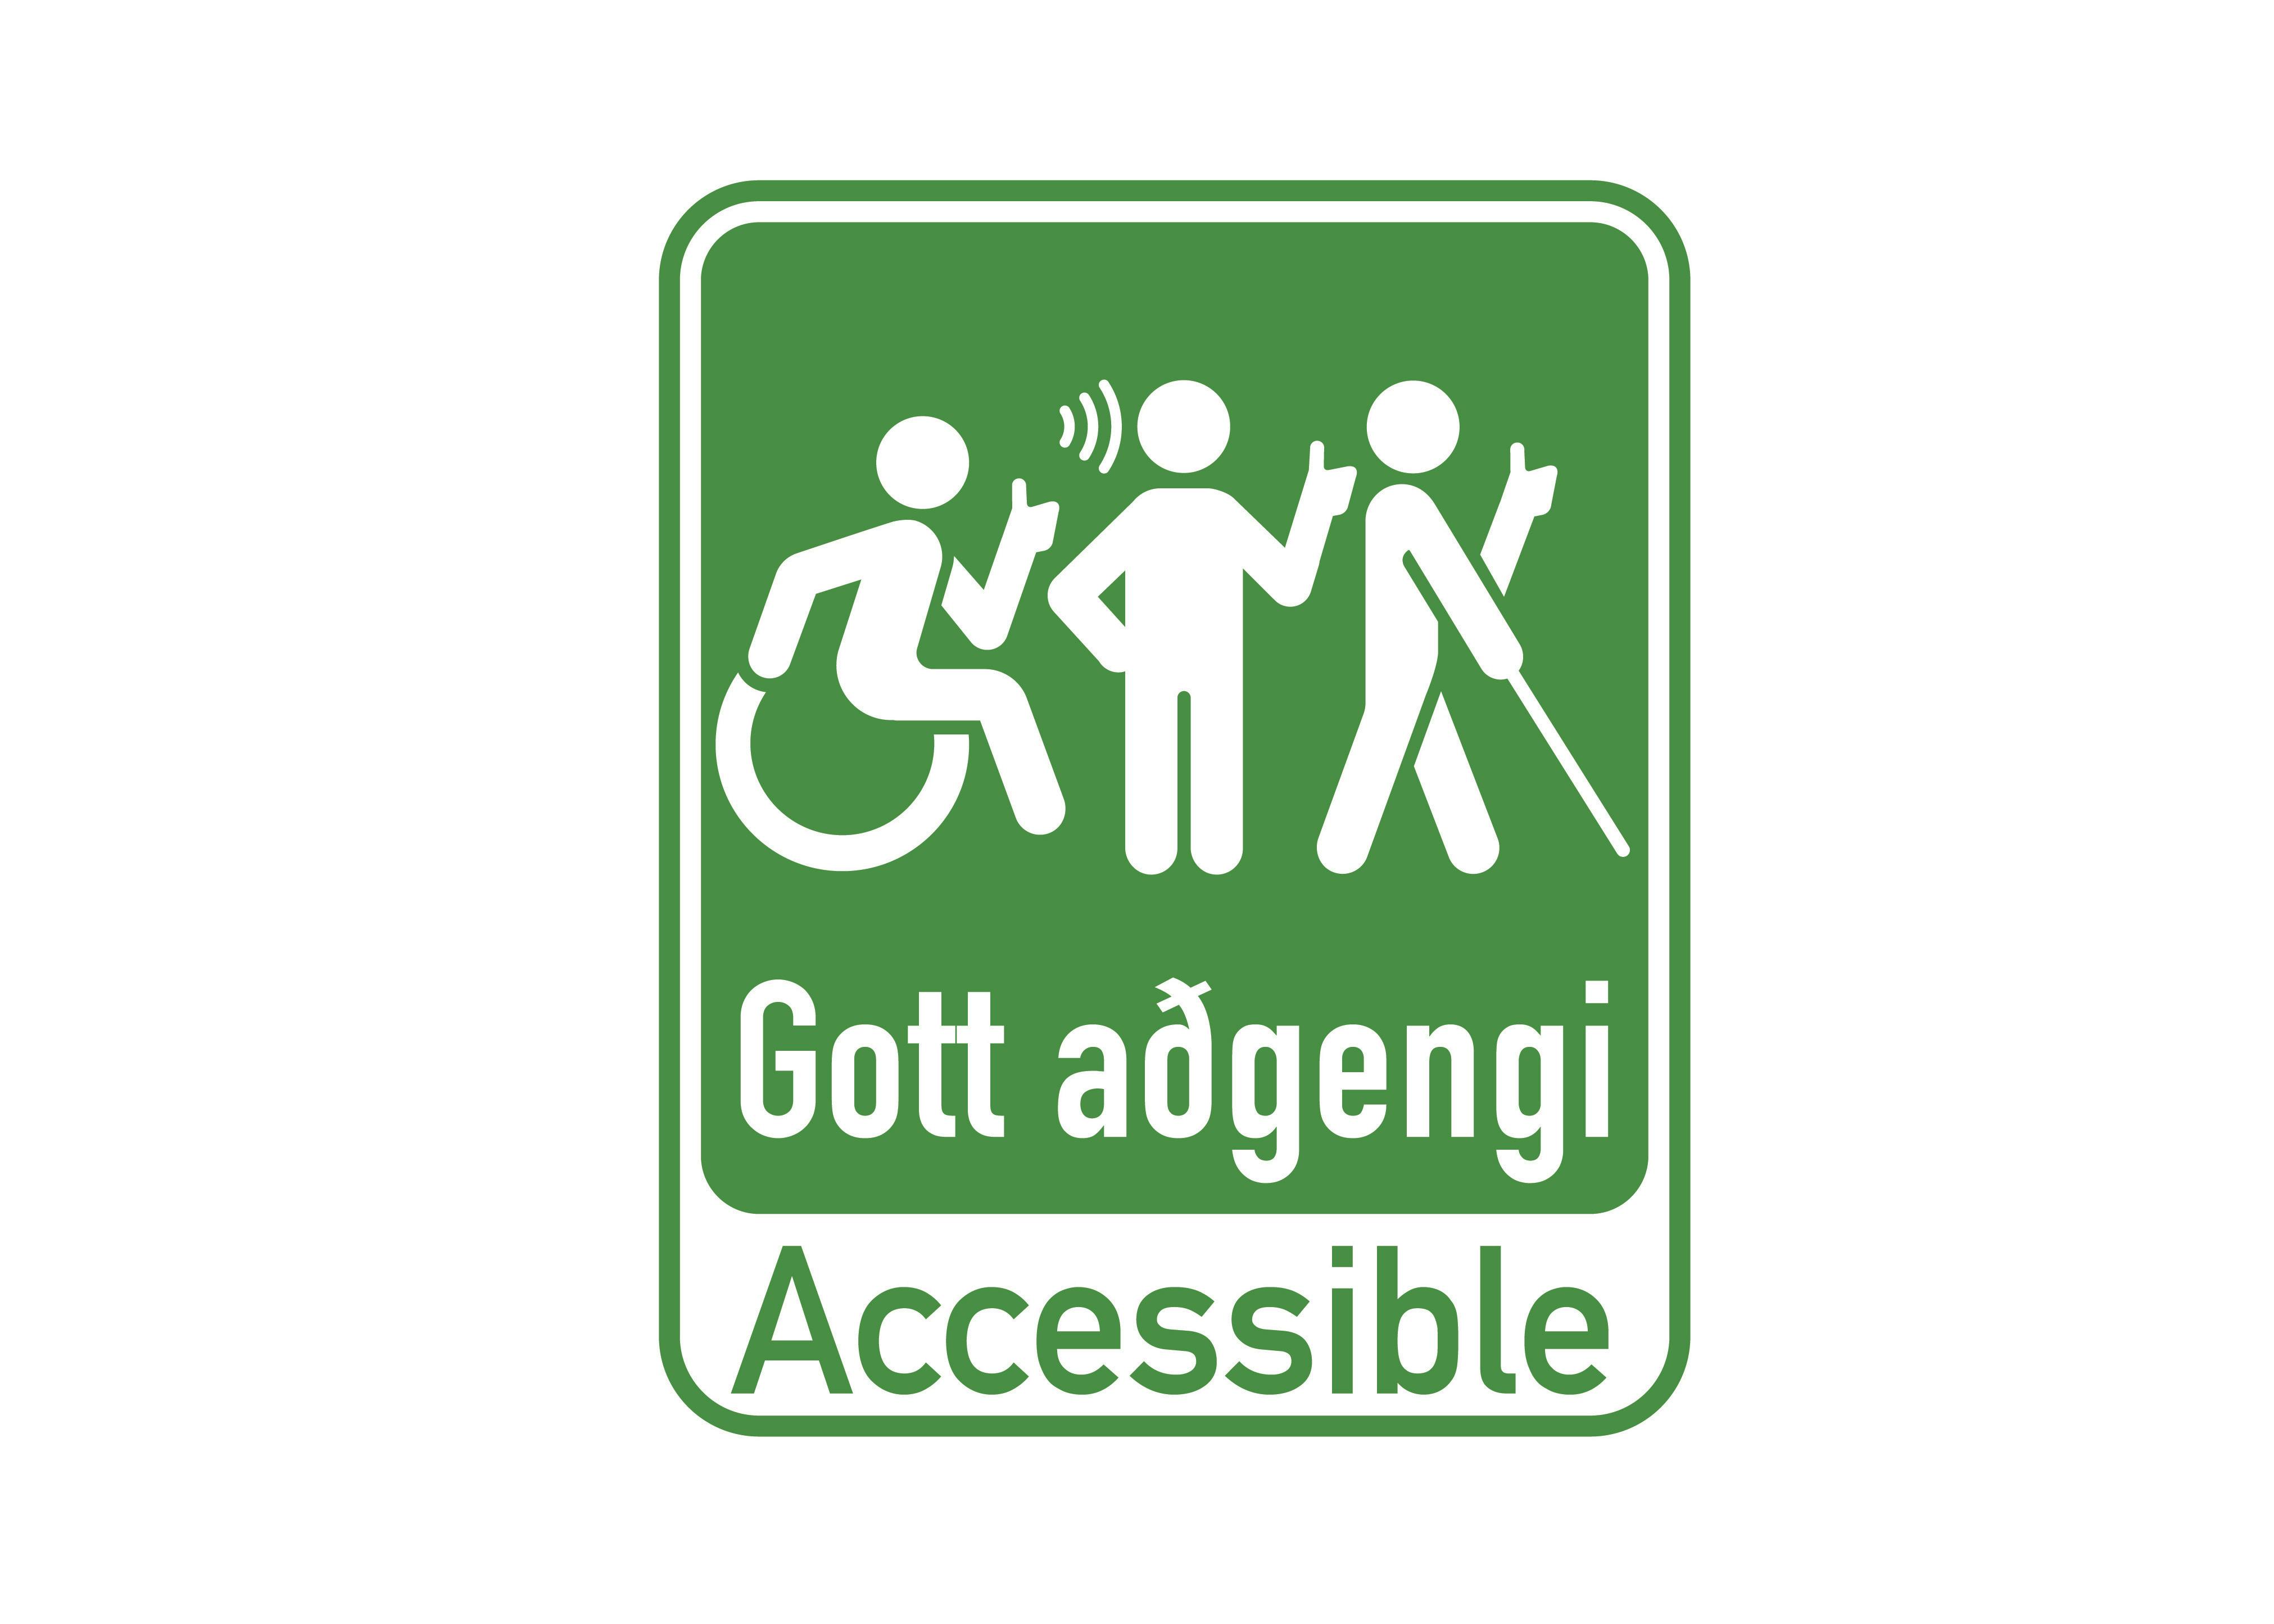 Icelandic Tourist Board label for Accessible Travel 